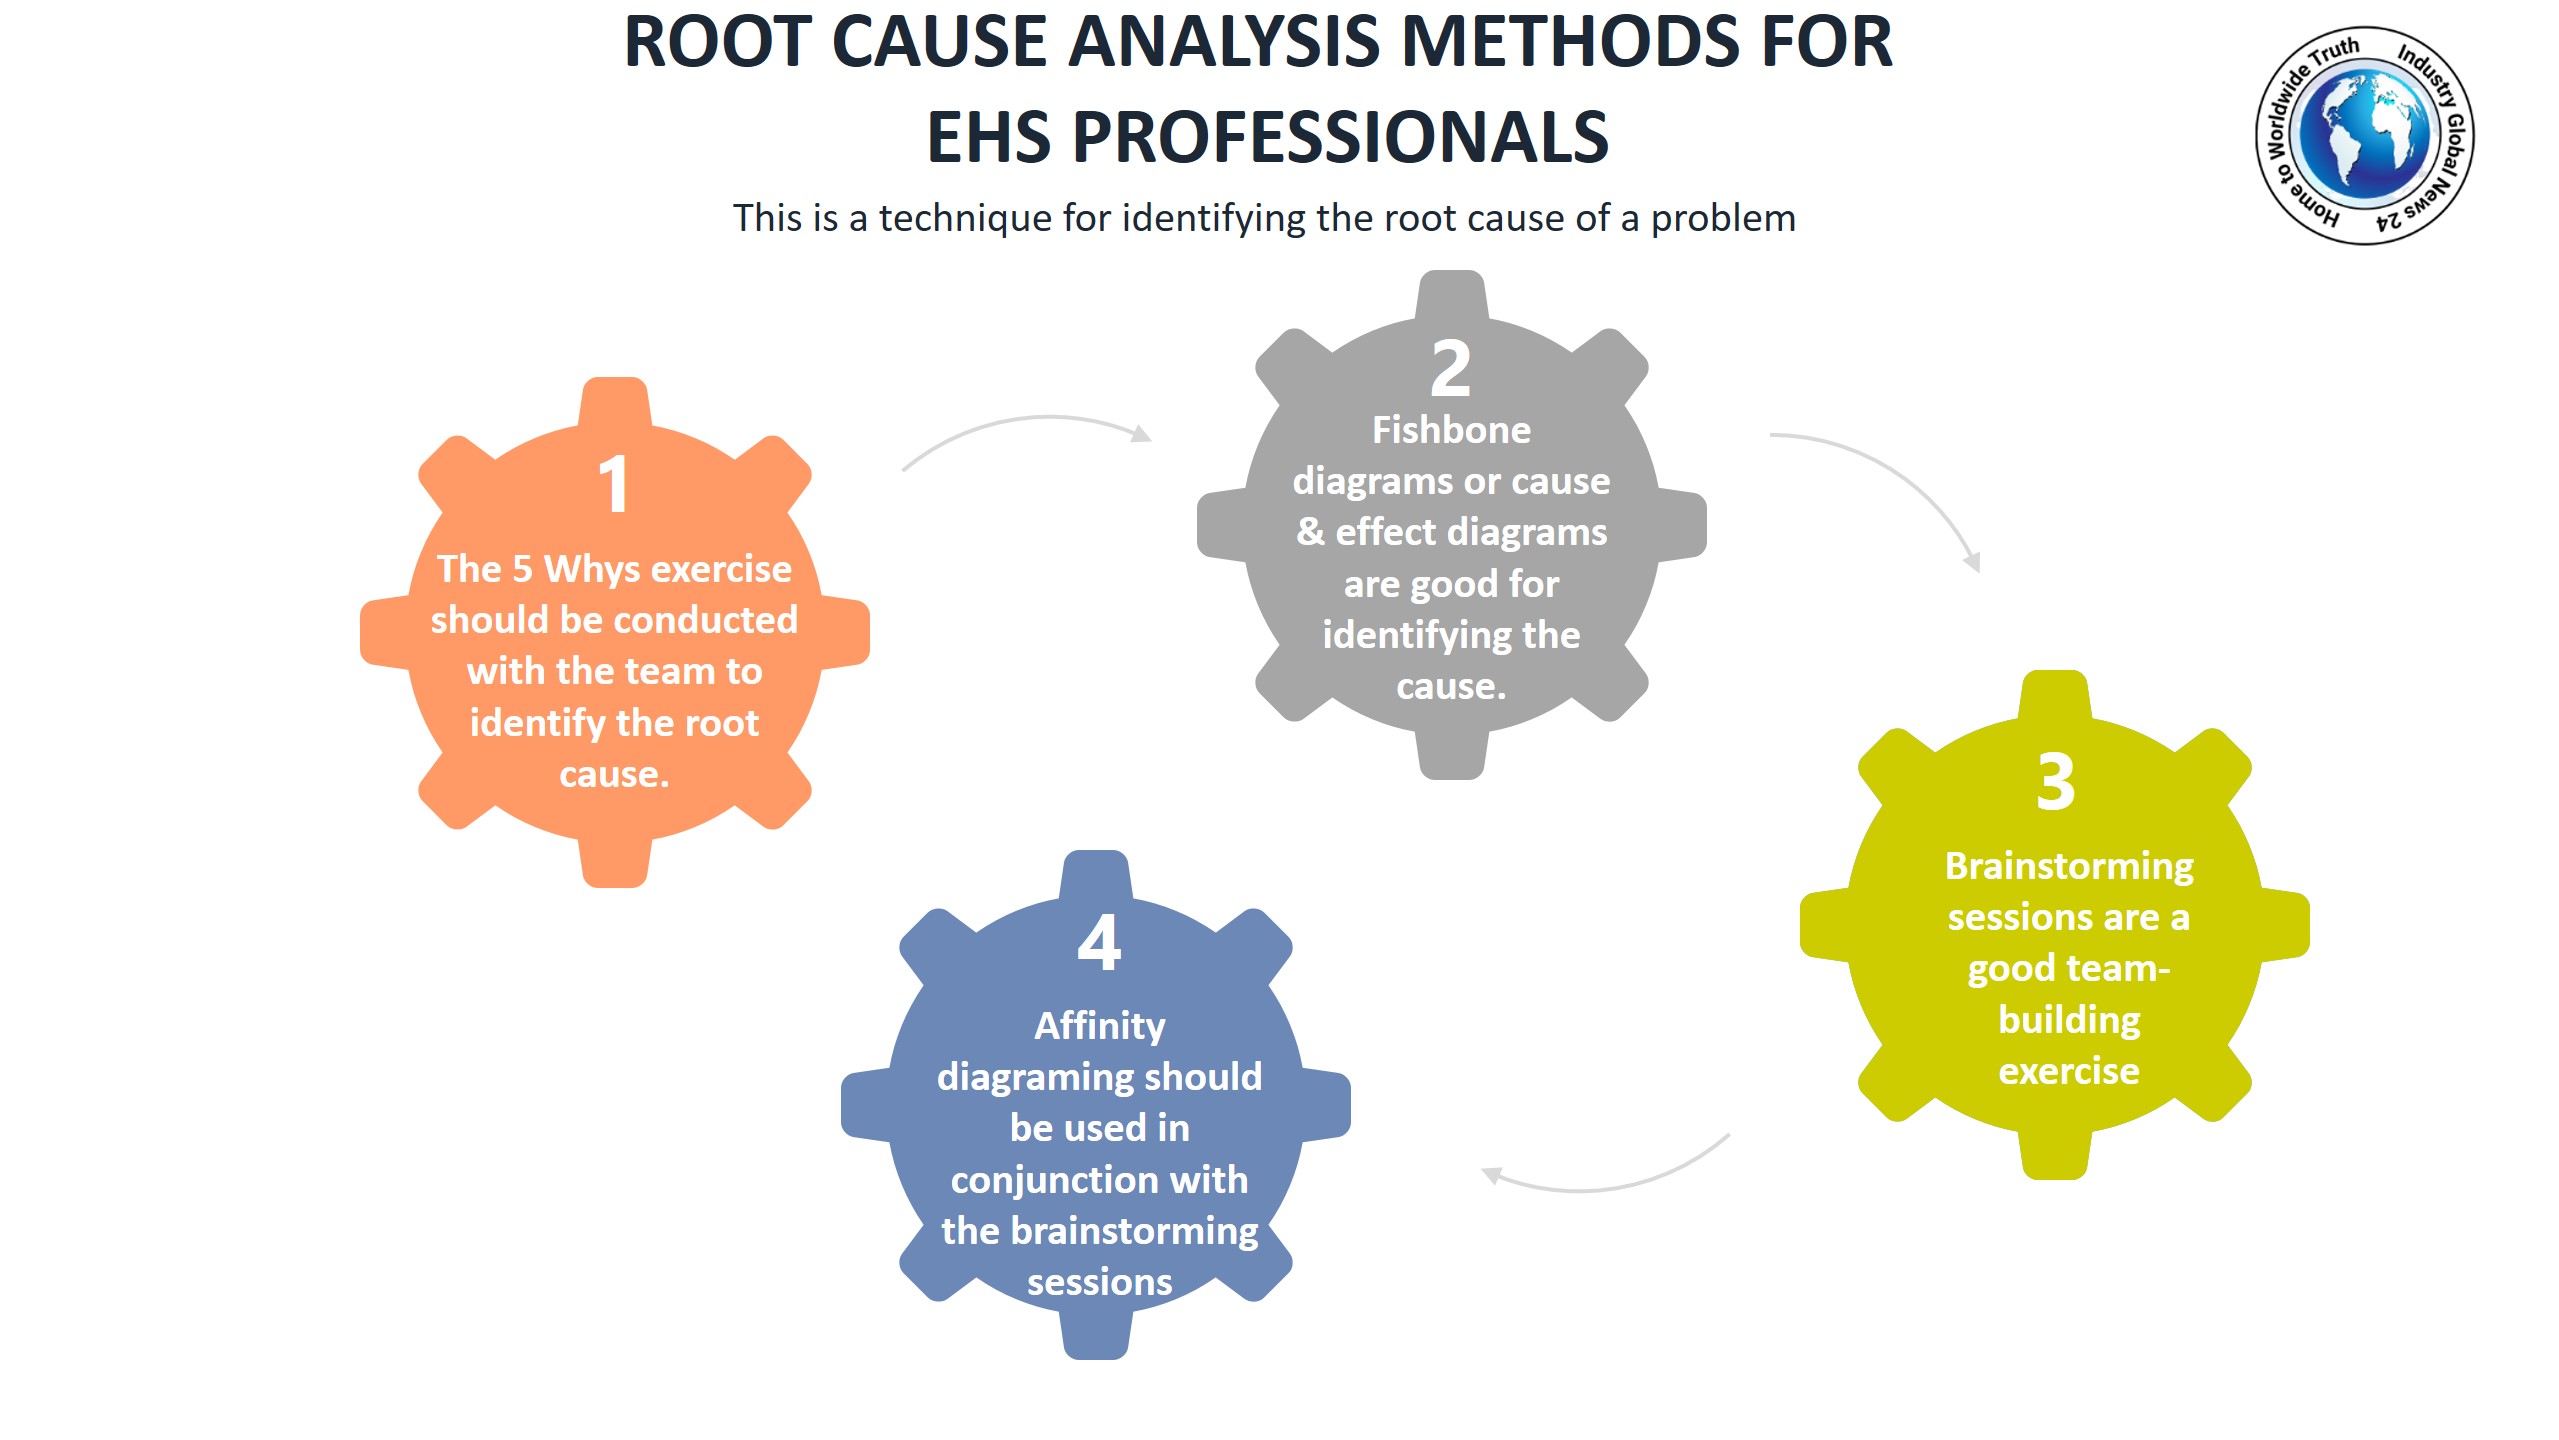 Root cause analysis methods for EHS professionals